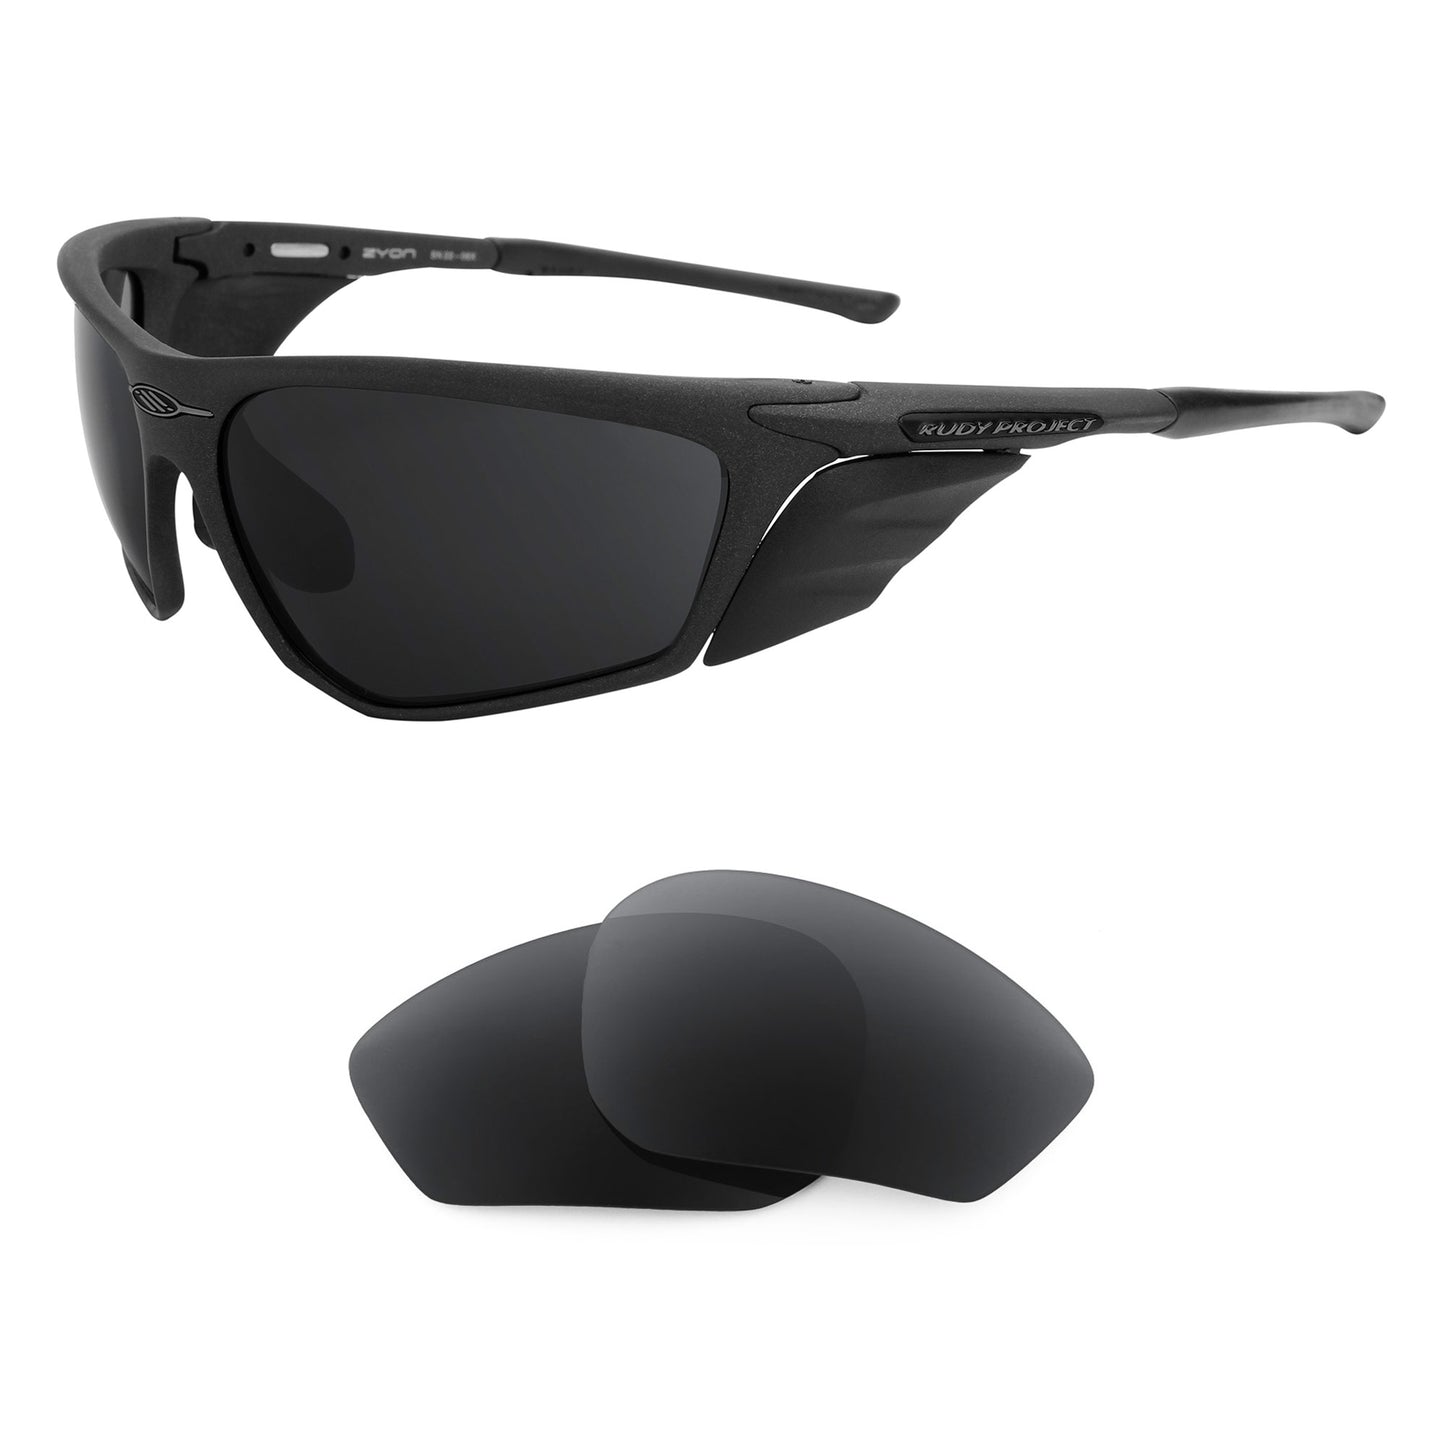 Rudy Project Zyon sunglasses with replacement lenses